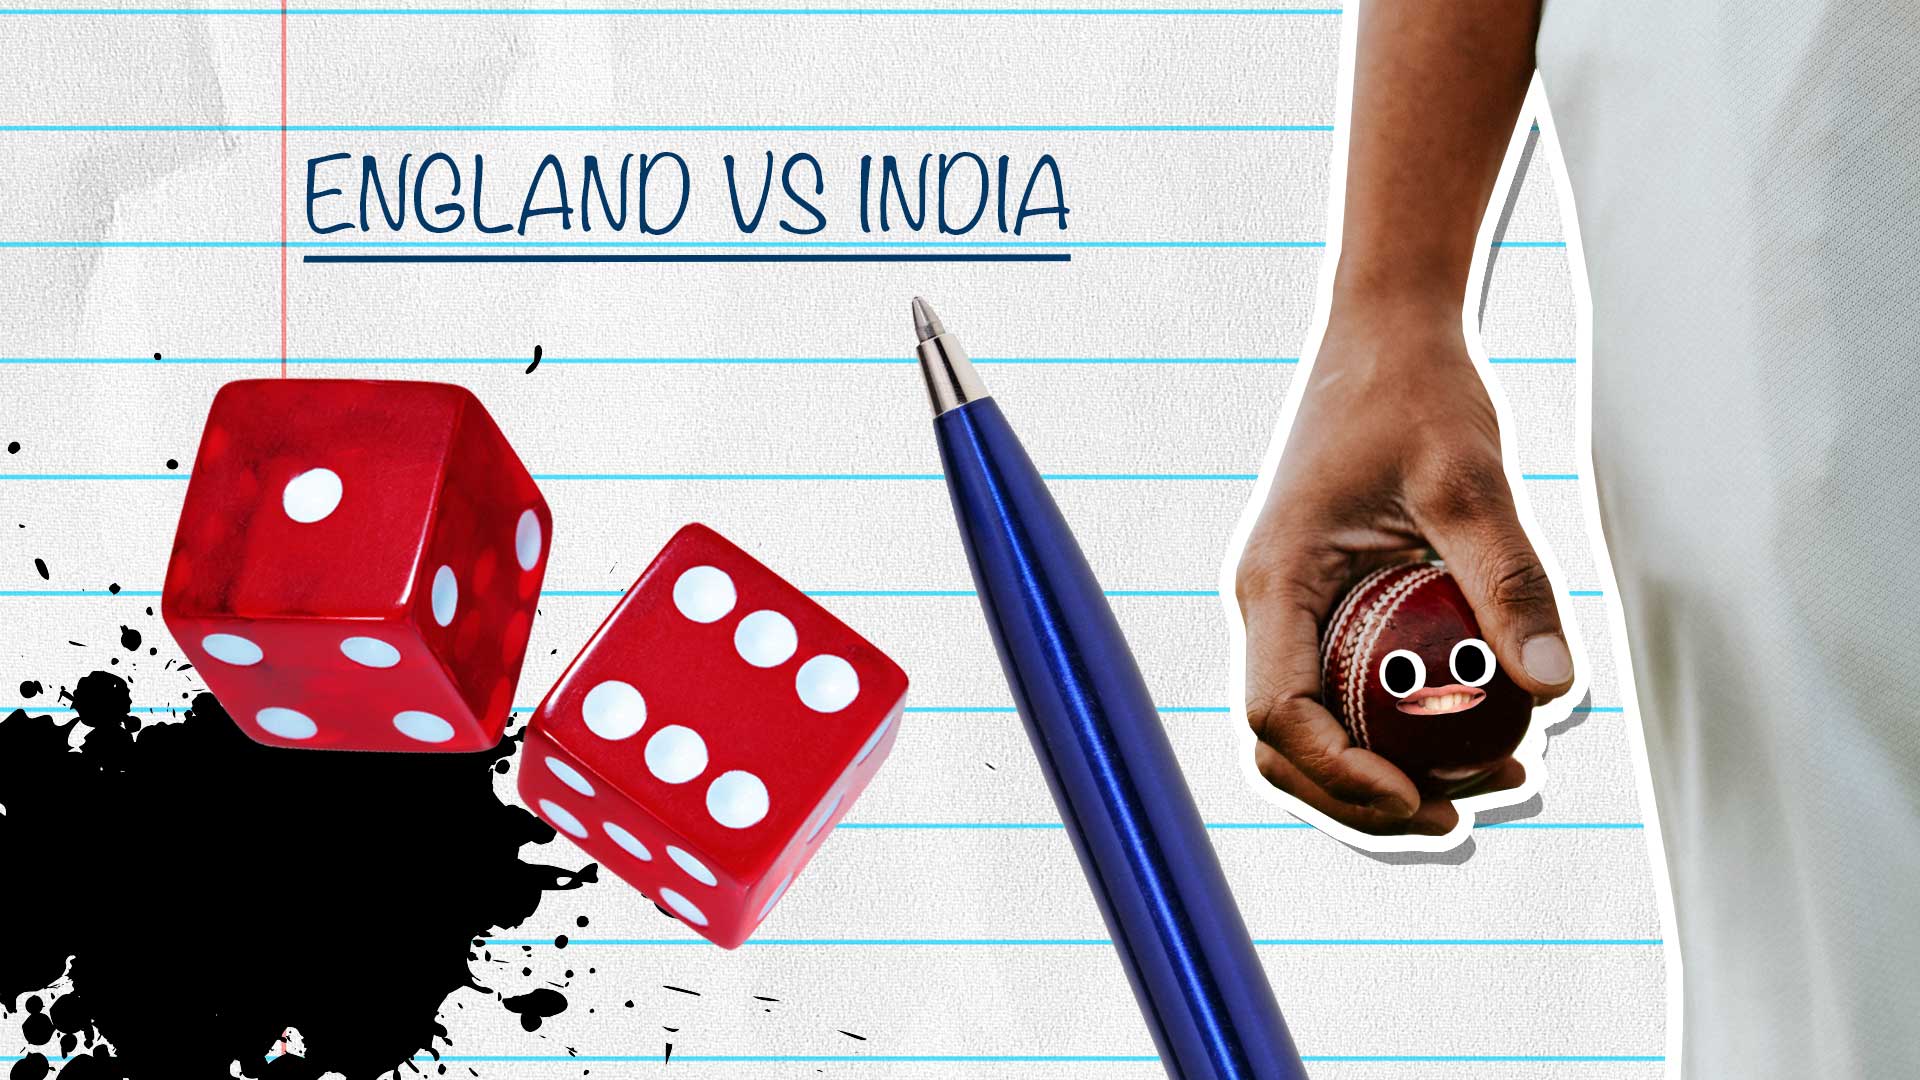 You can play cricket using dice, pen and paper